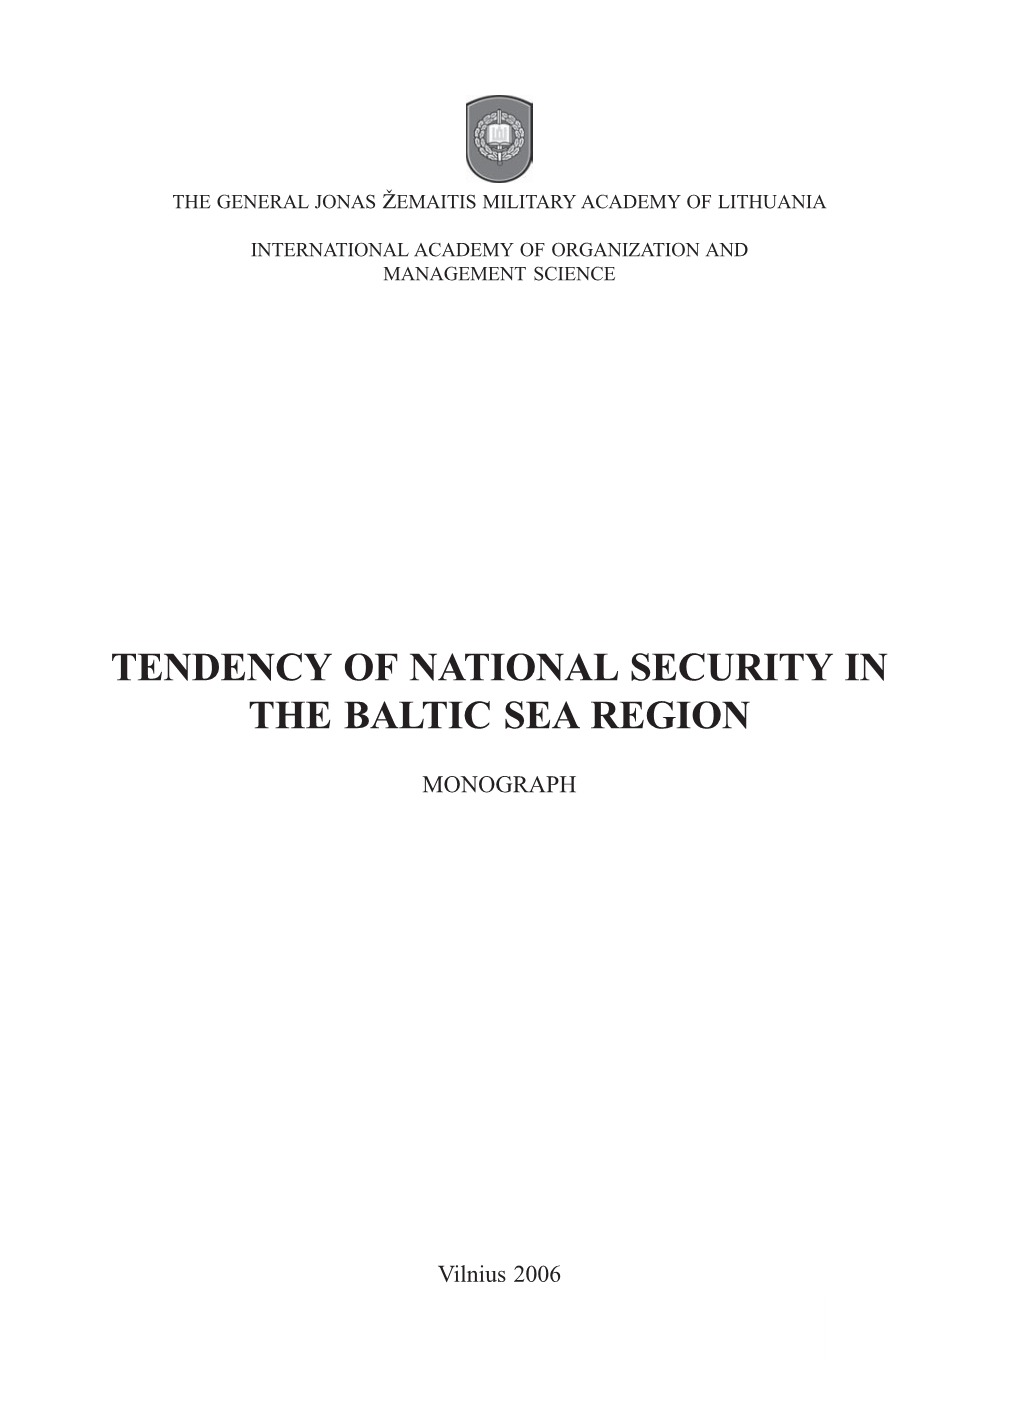 Tendency of National Security in the Baltic Sea Region